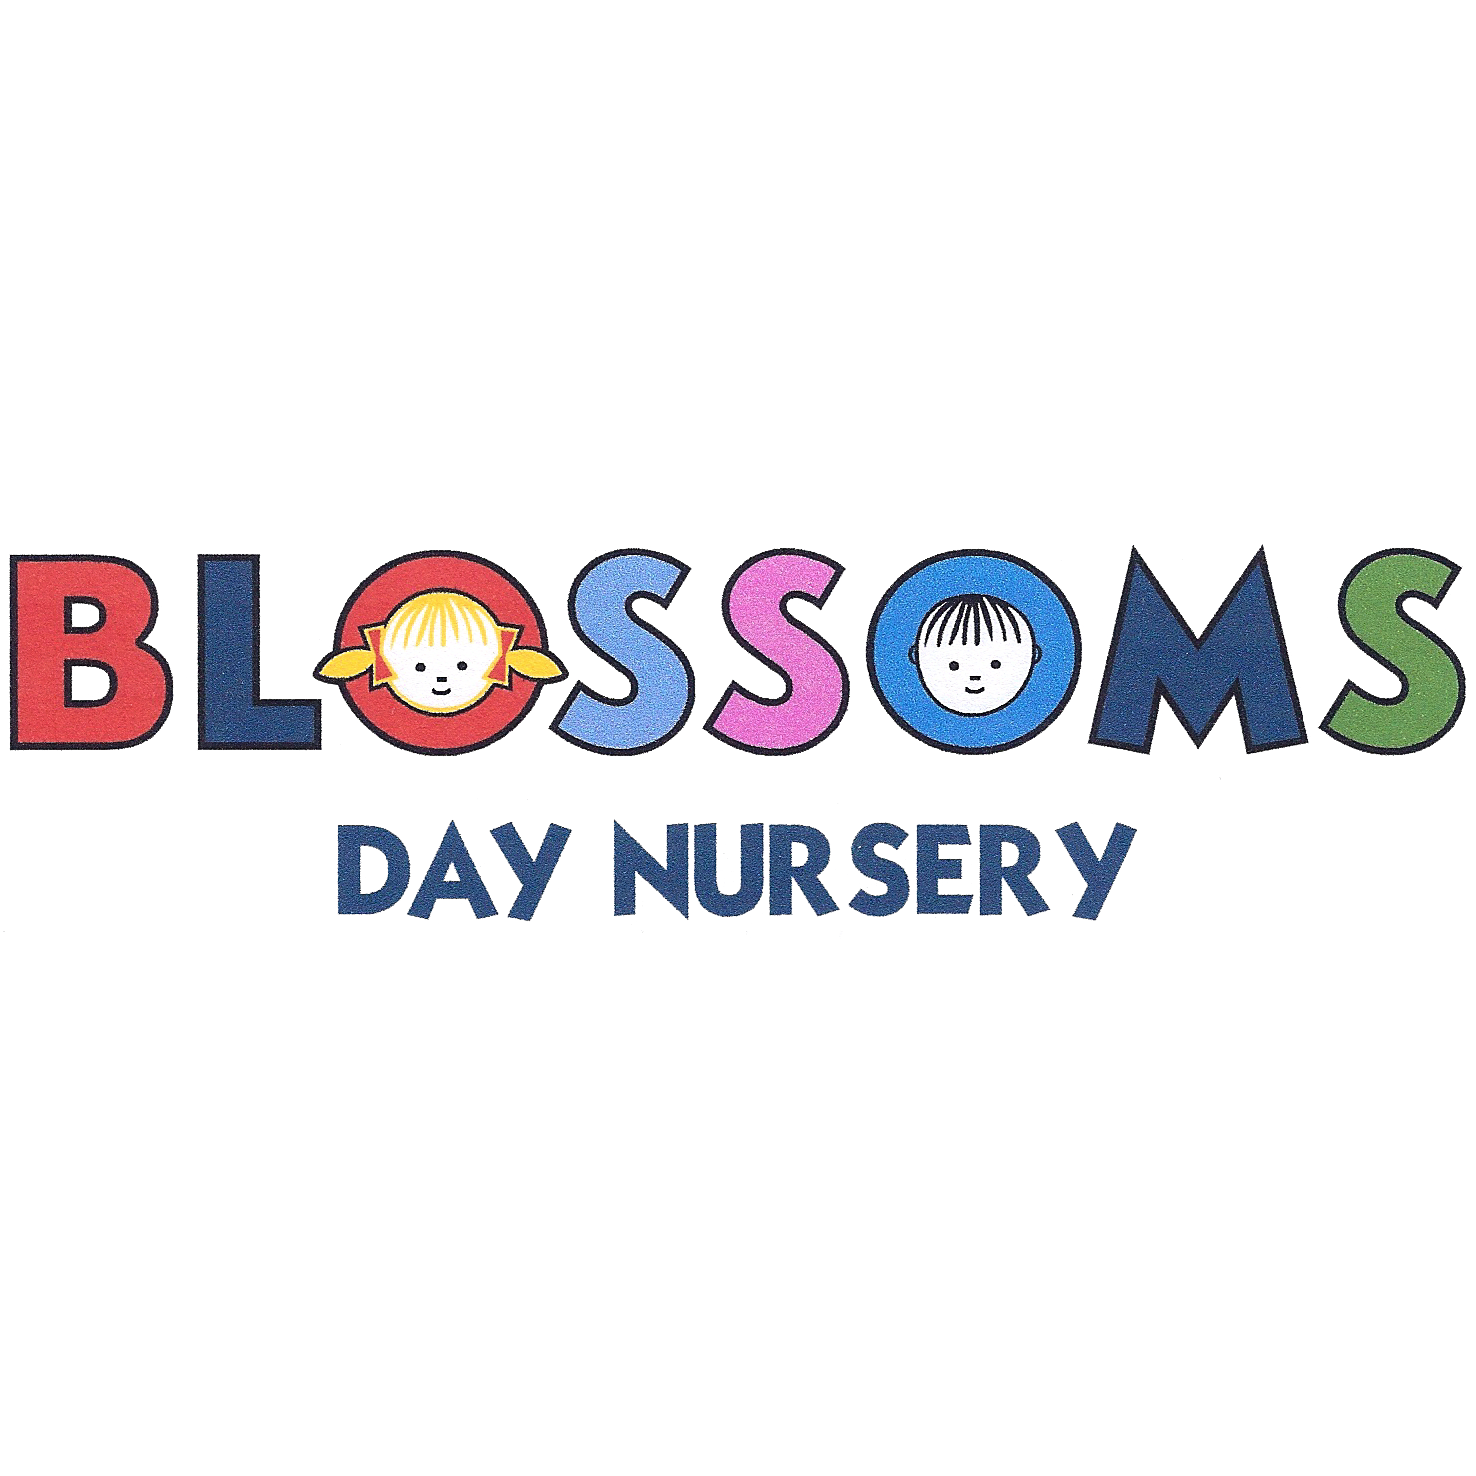 Blossoms Day Nursery - Leicester, Leicestershire LE2 2AB - 01162 448600 | ShowMeLocal.com